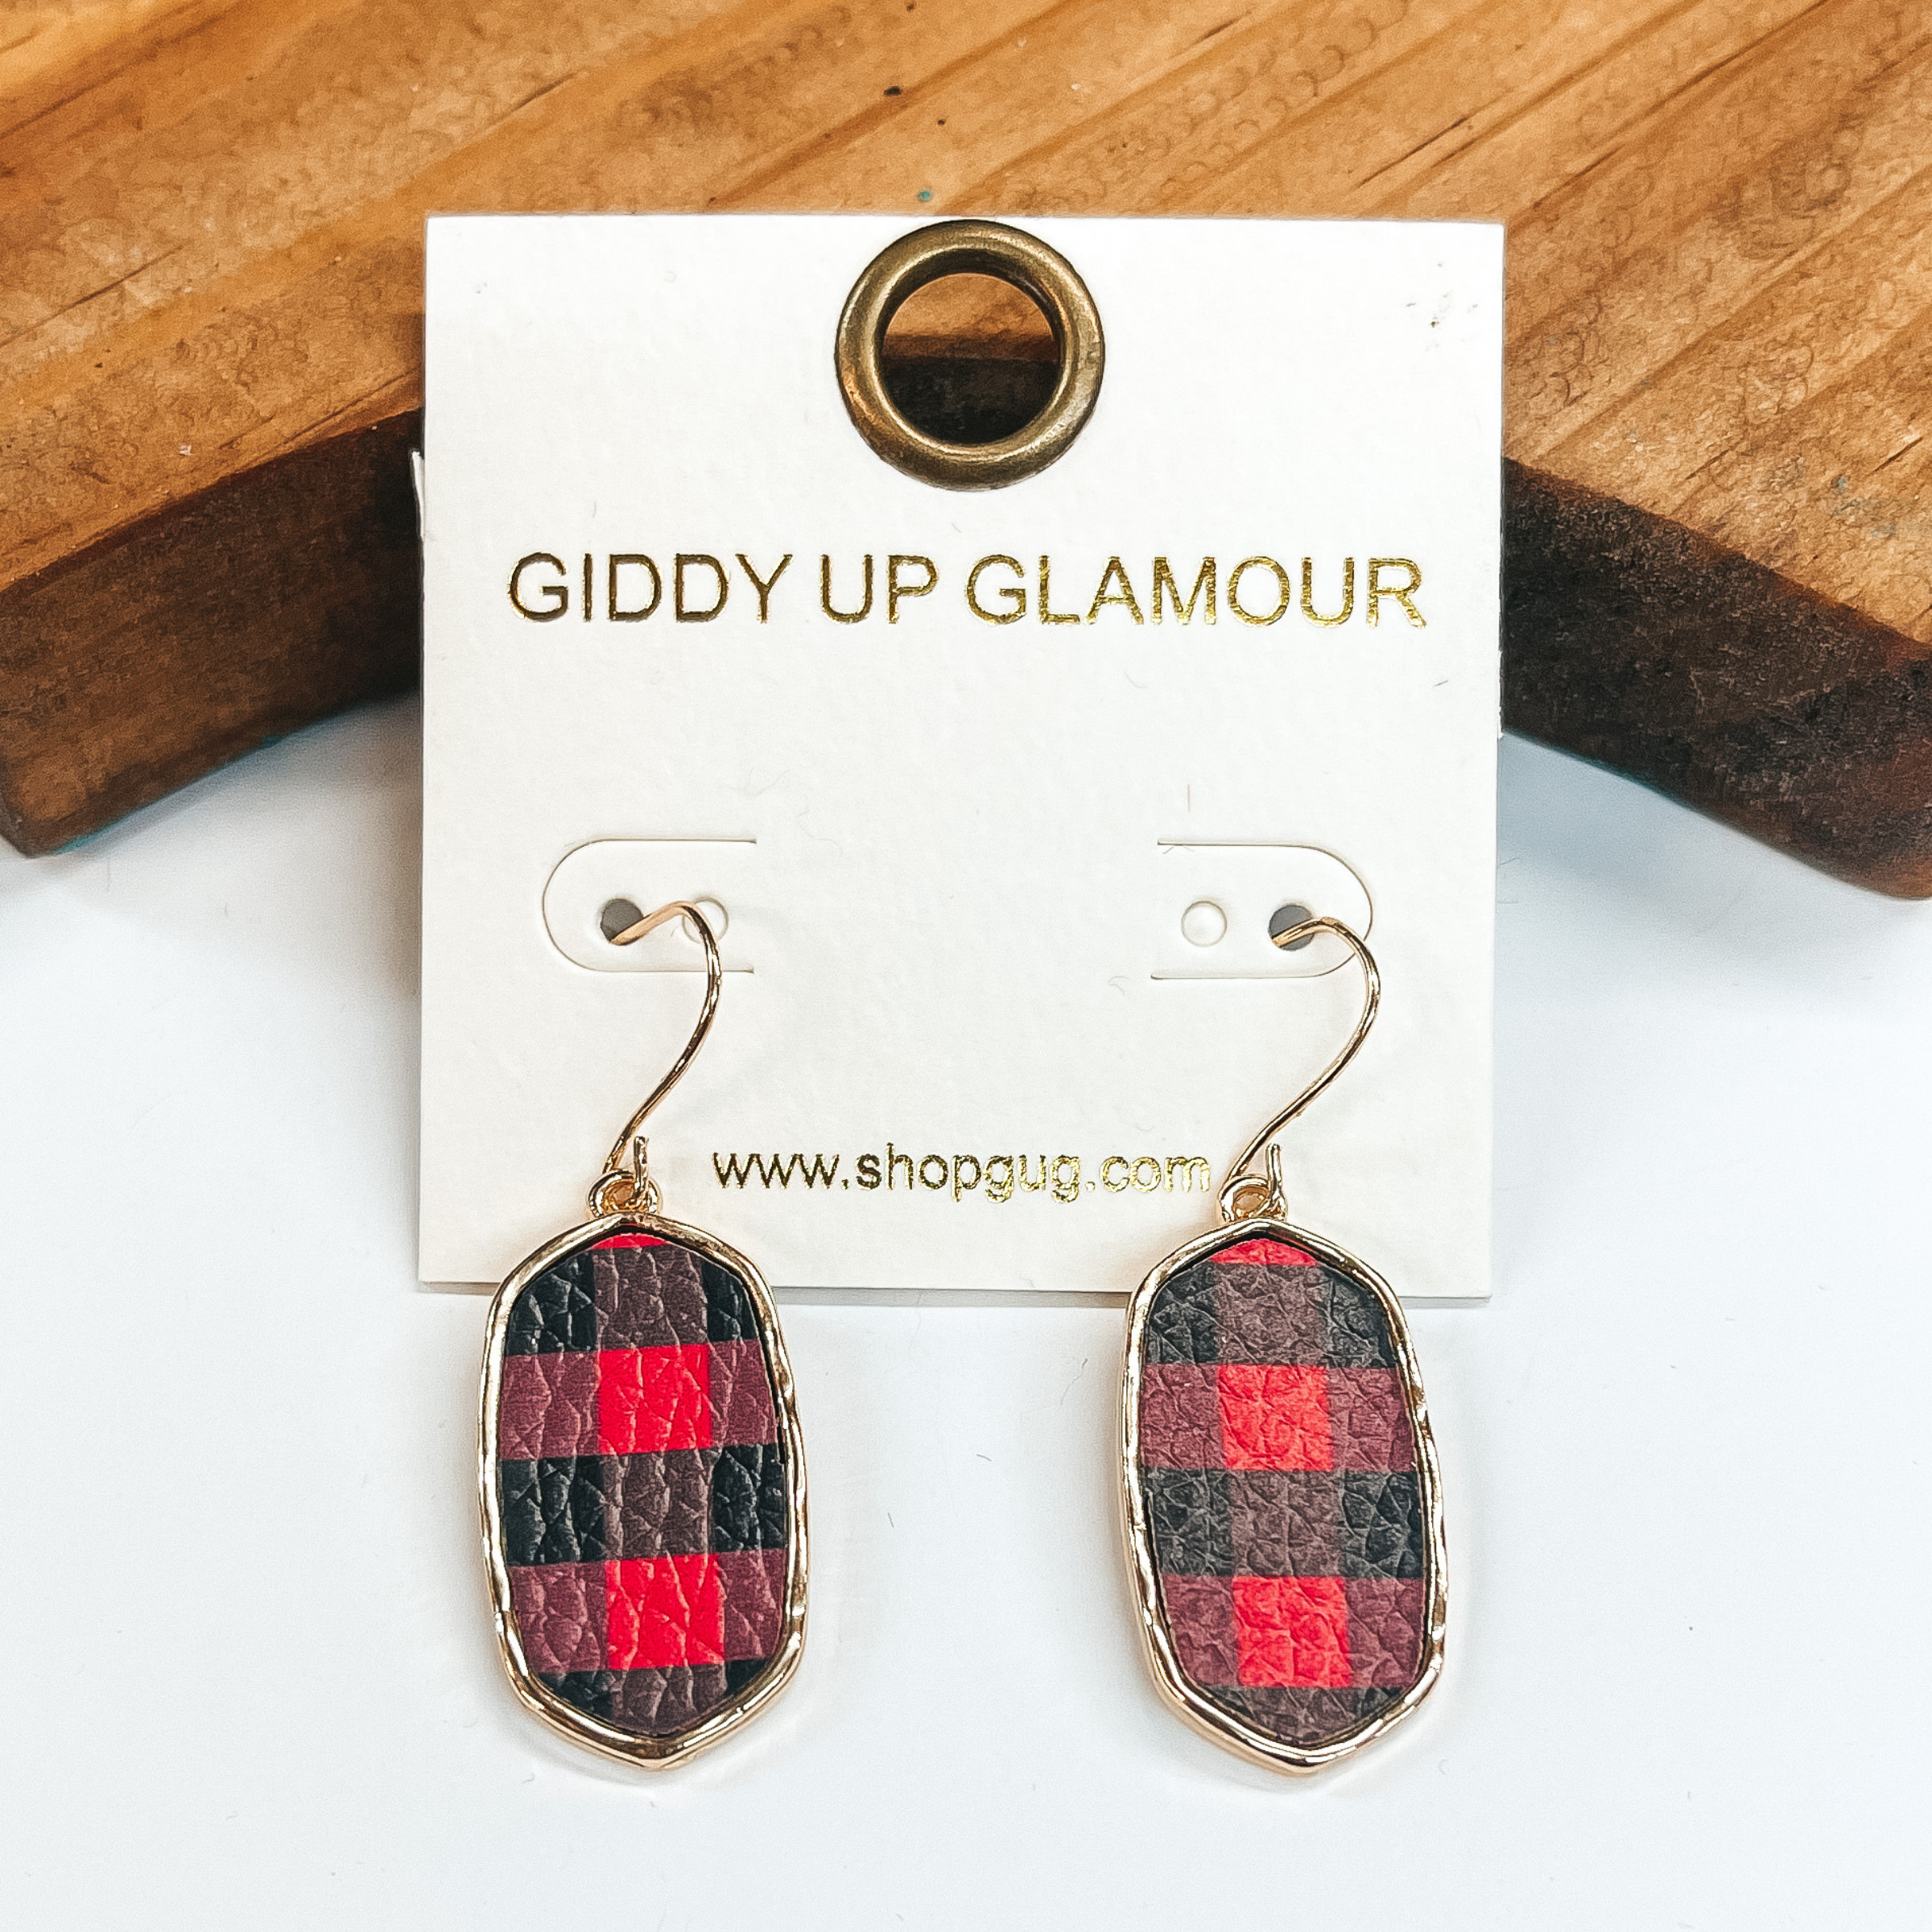 Rectangular earrings with gold setting in  red and black plaid. Taken in a white background  with a brown block in the back.